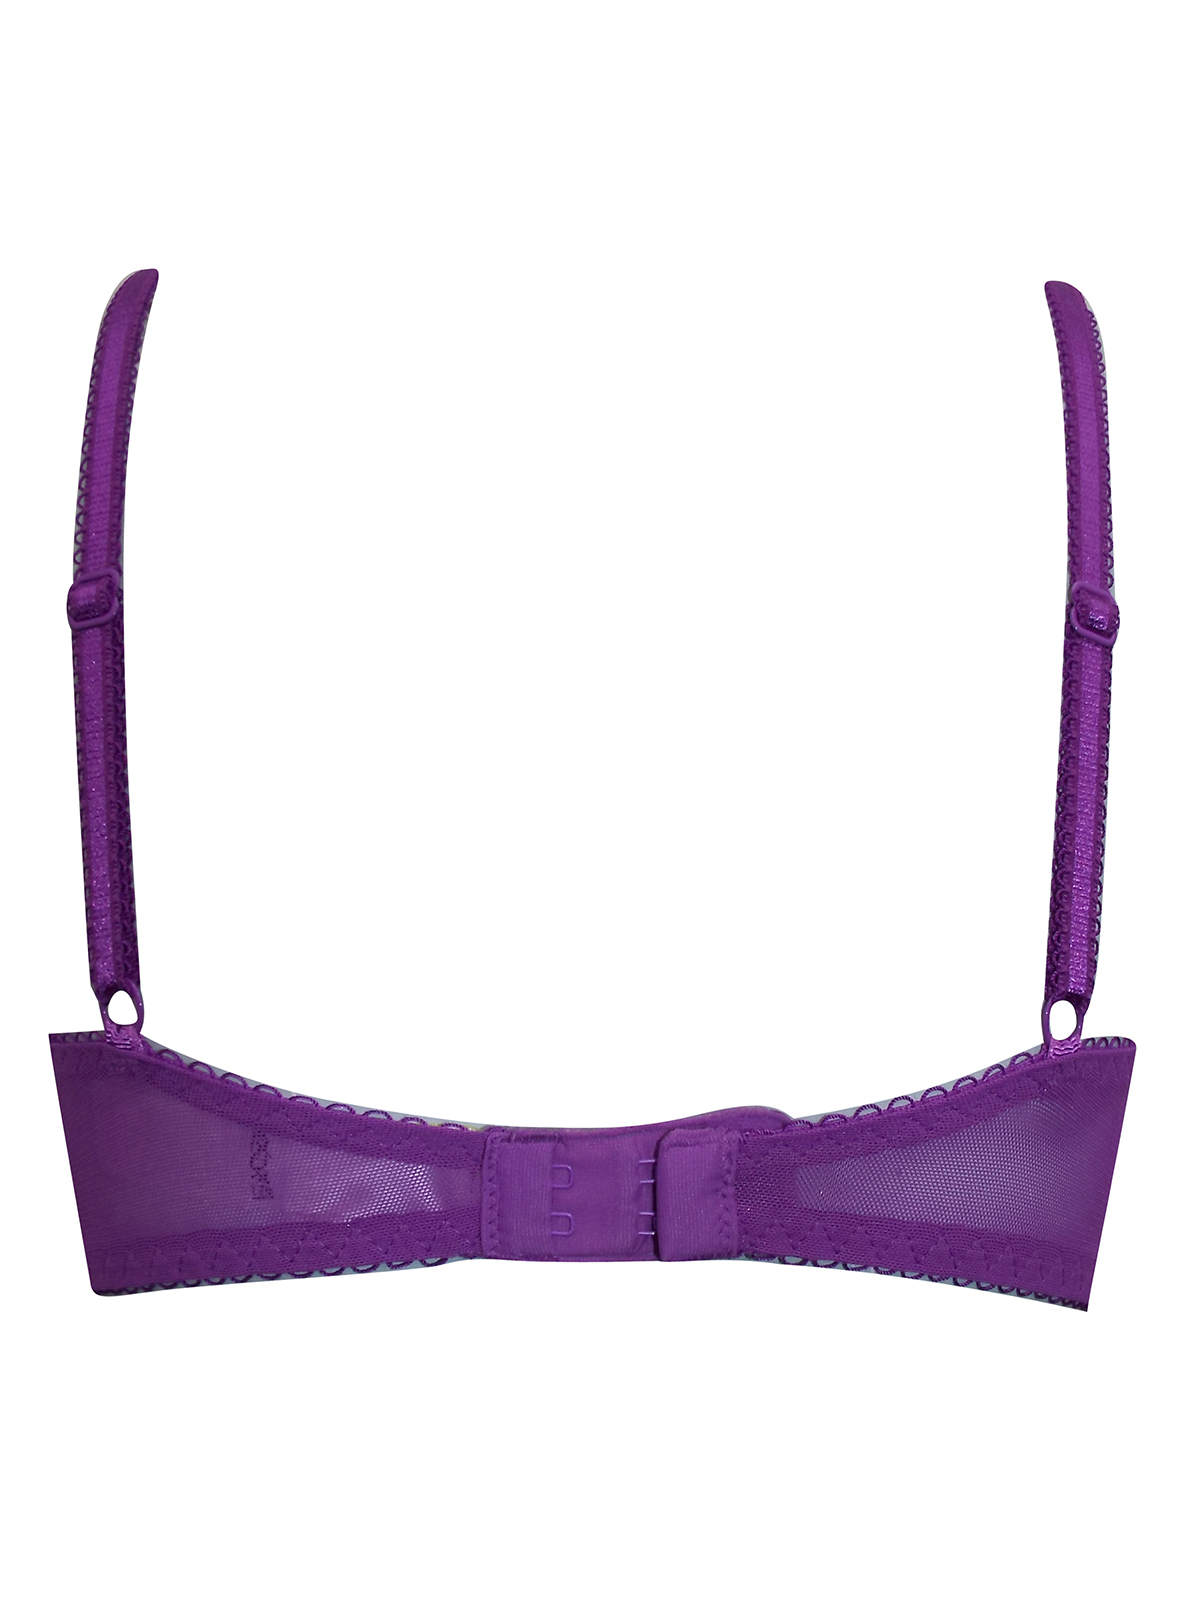 Marks and Spencer - - M&5 BRIGHT-VIOLET Lace Non-Padded Balcony Bra ...